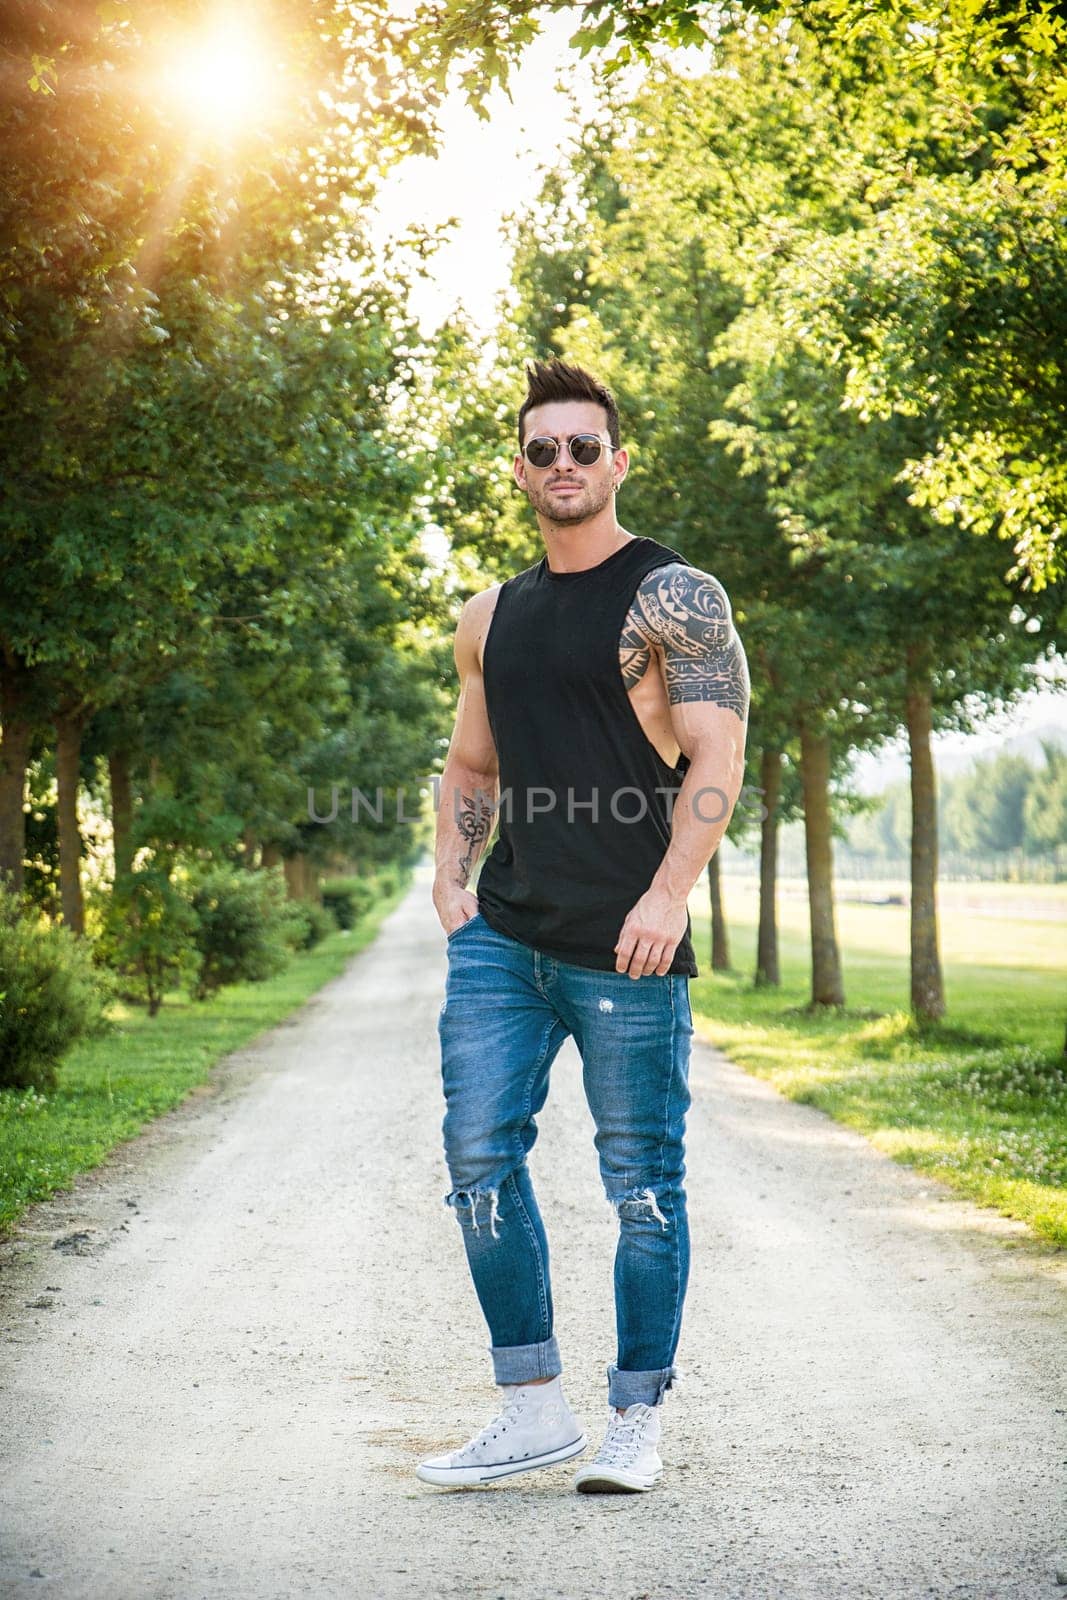 Photo of a man standing on a dirt road surrounded by trees by artofphoto